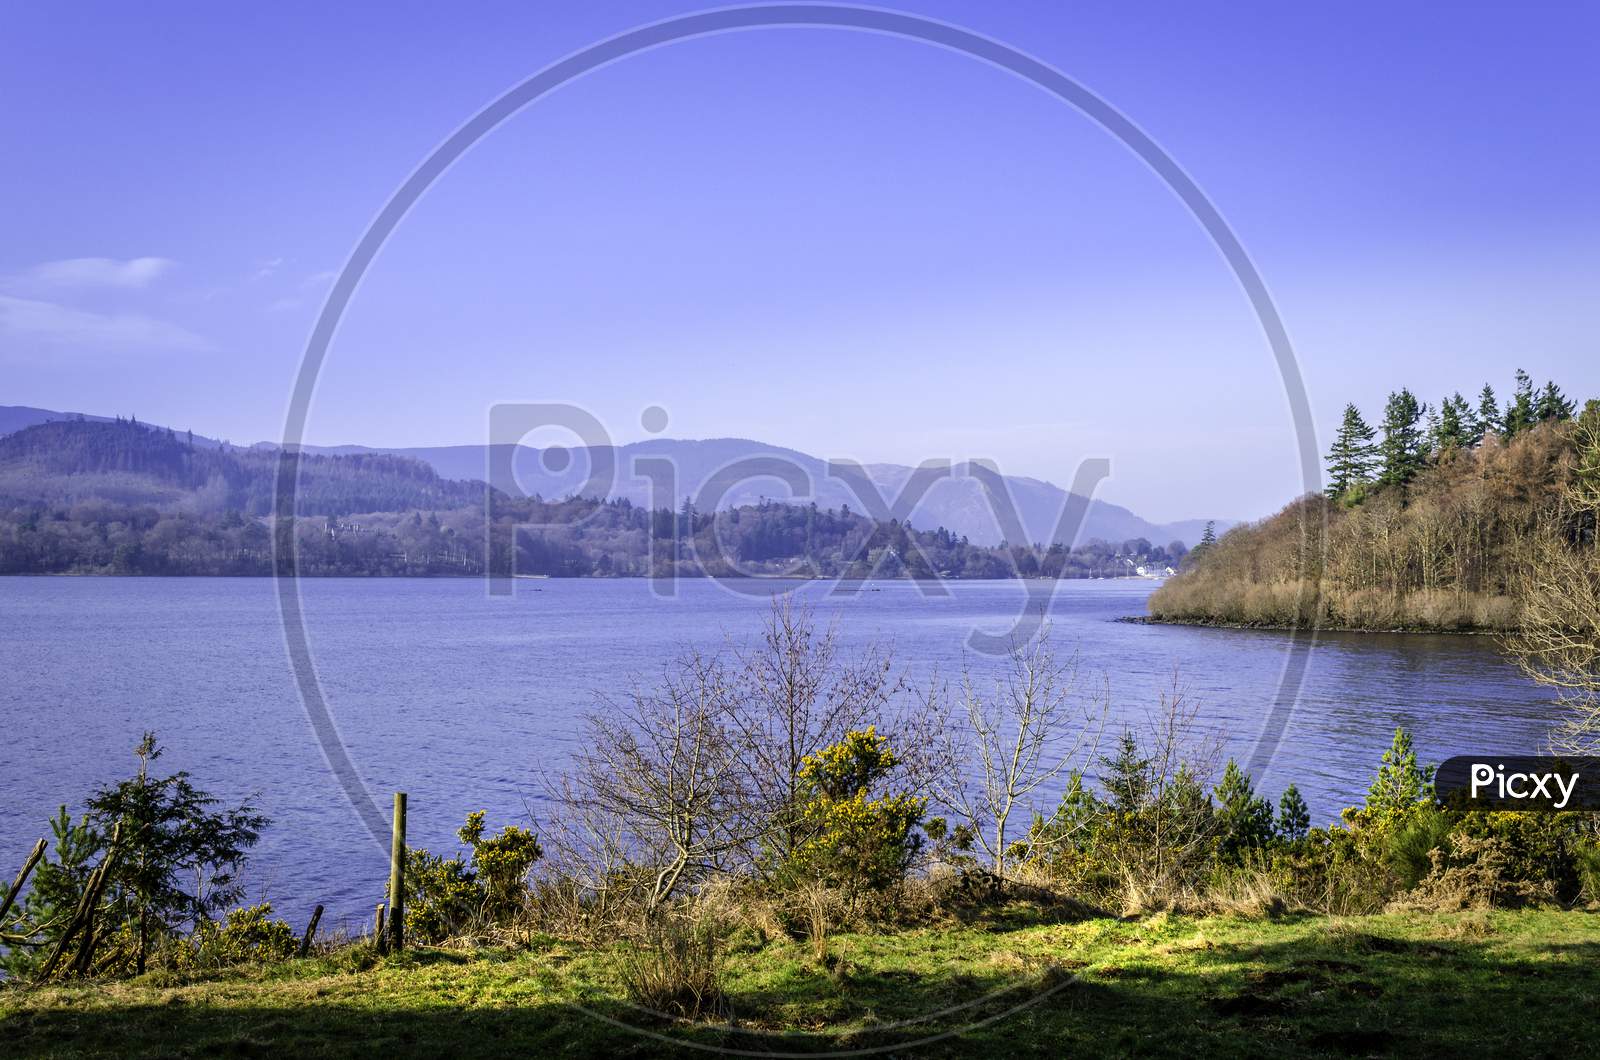 A peaceful view of the mountain range and Derwent Water in Cumbria.